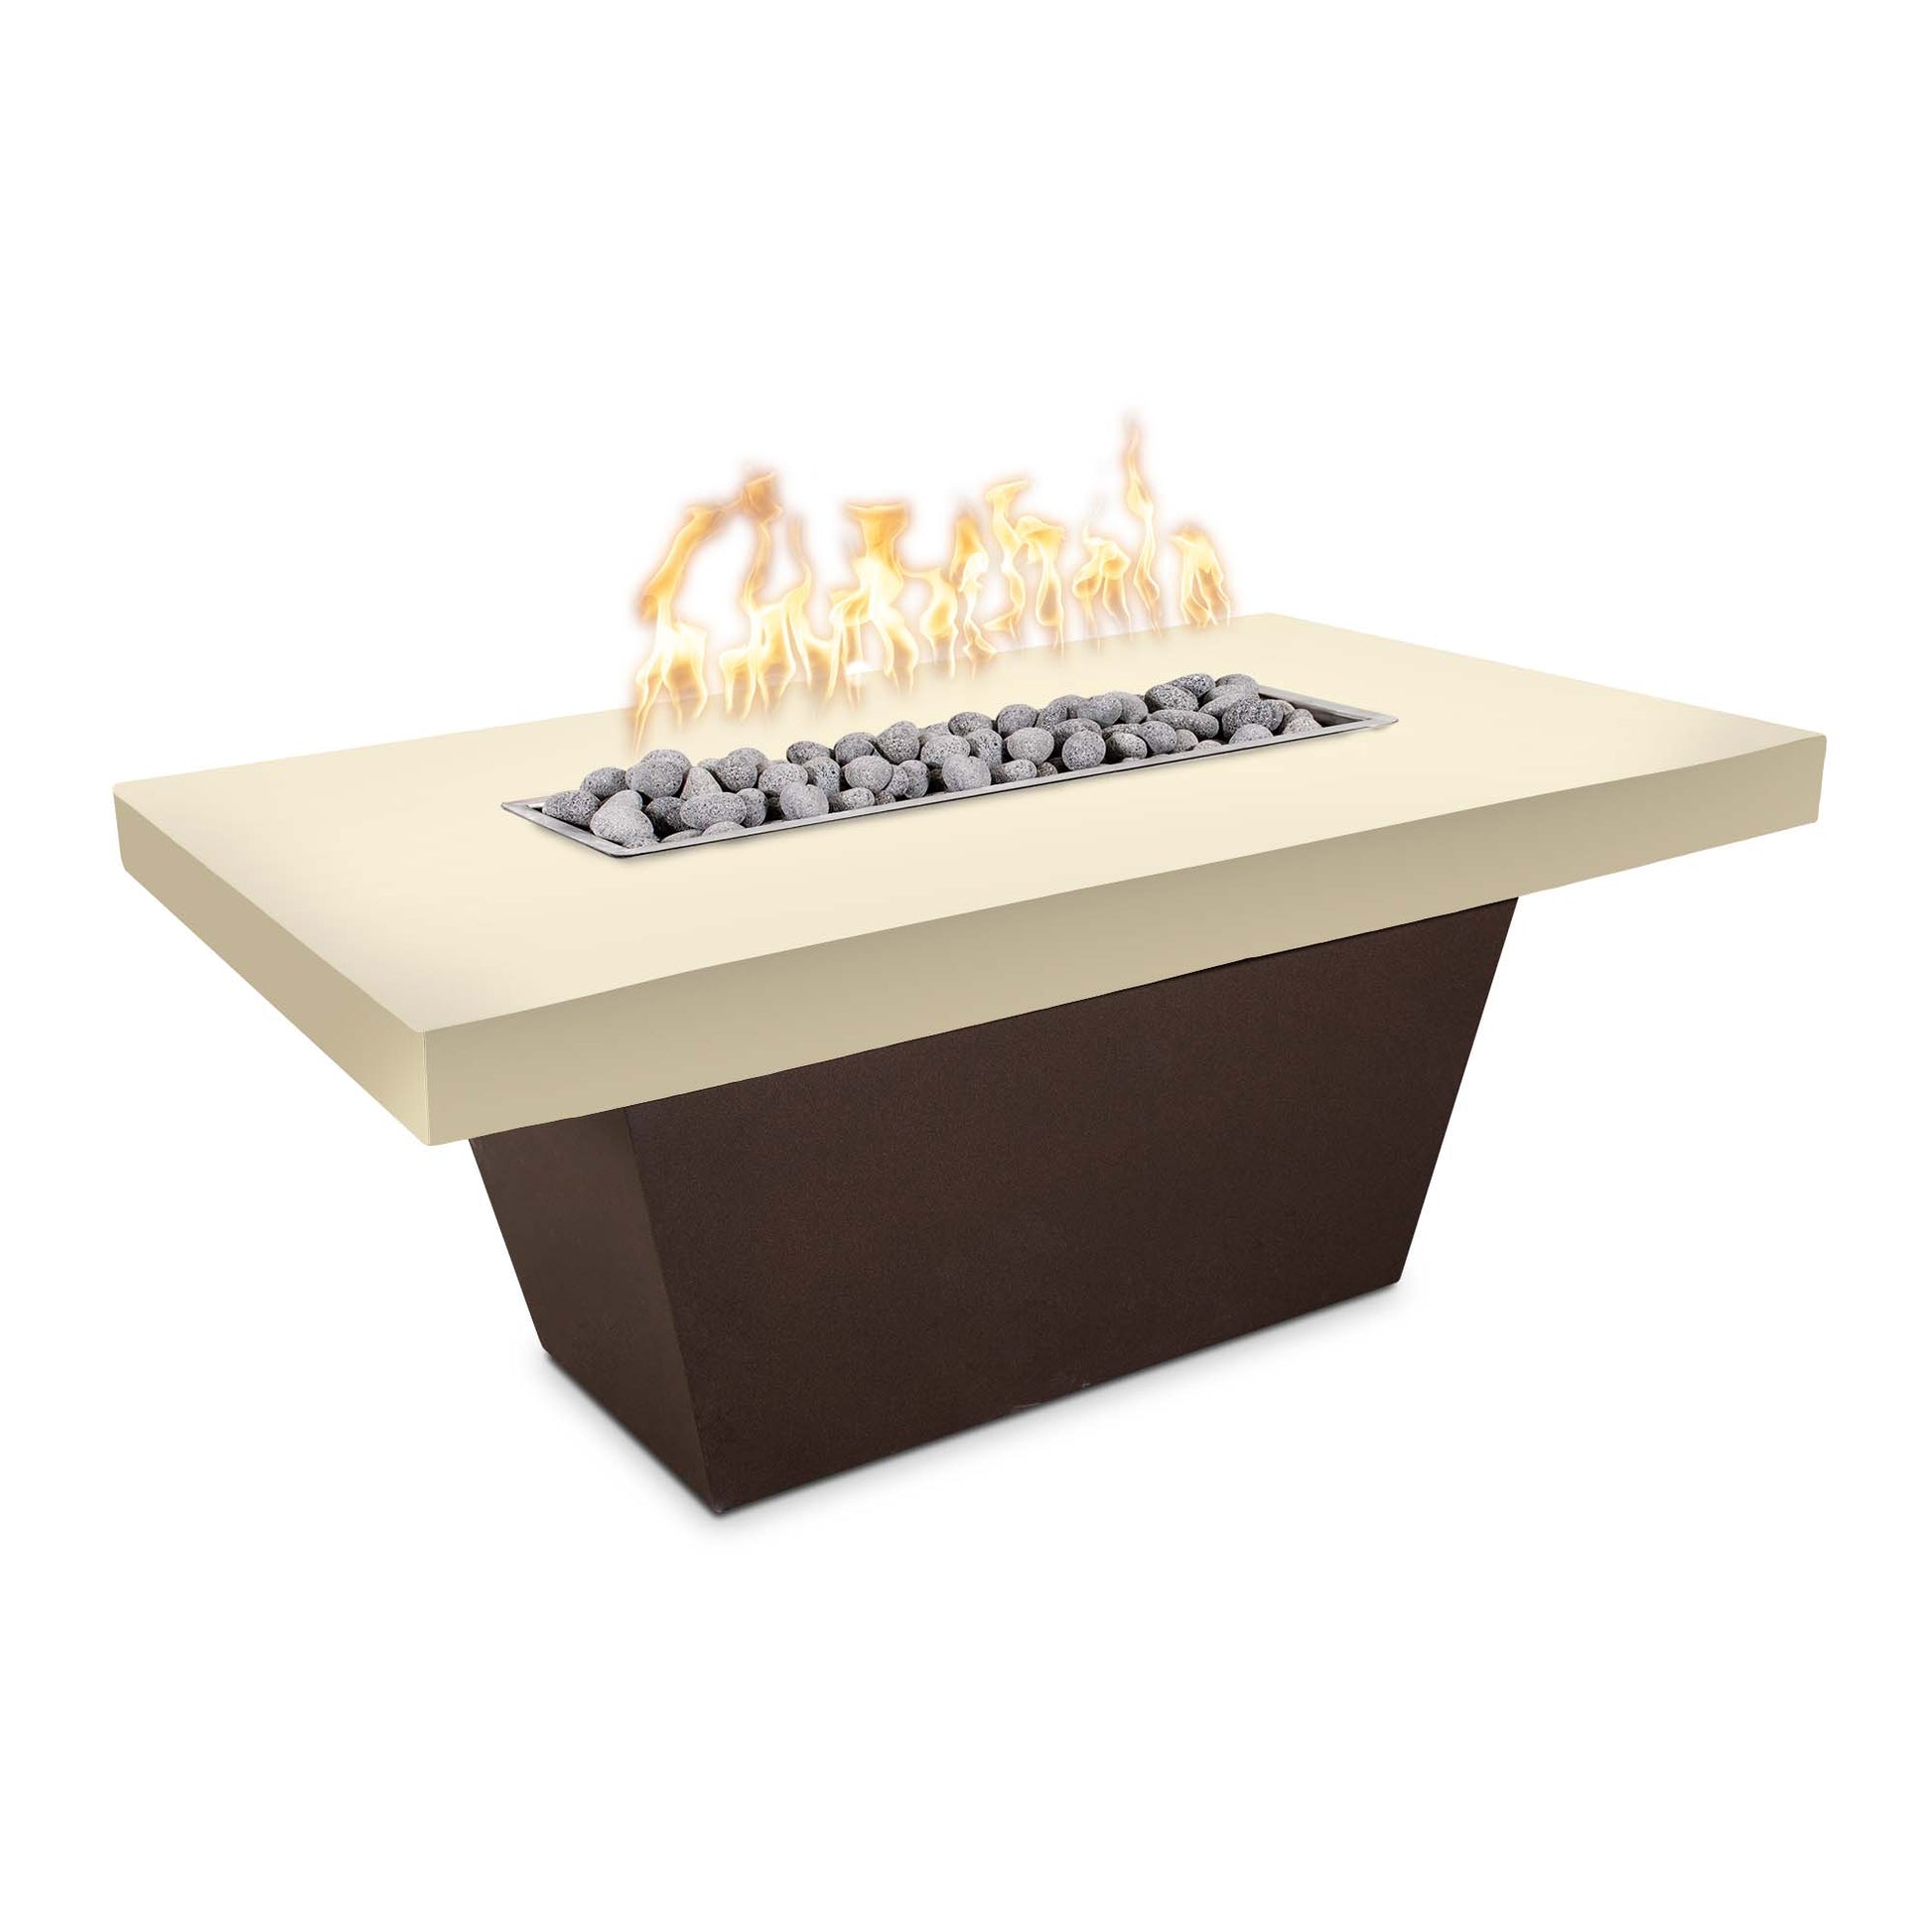 The Outdoor Plus Tacoma 48" Gray Concrete Top & Java Powder Coated Base Liquid Propane Fire Table with Match Lit Ignition